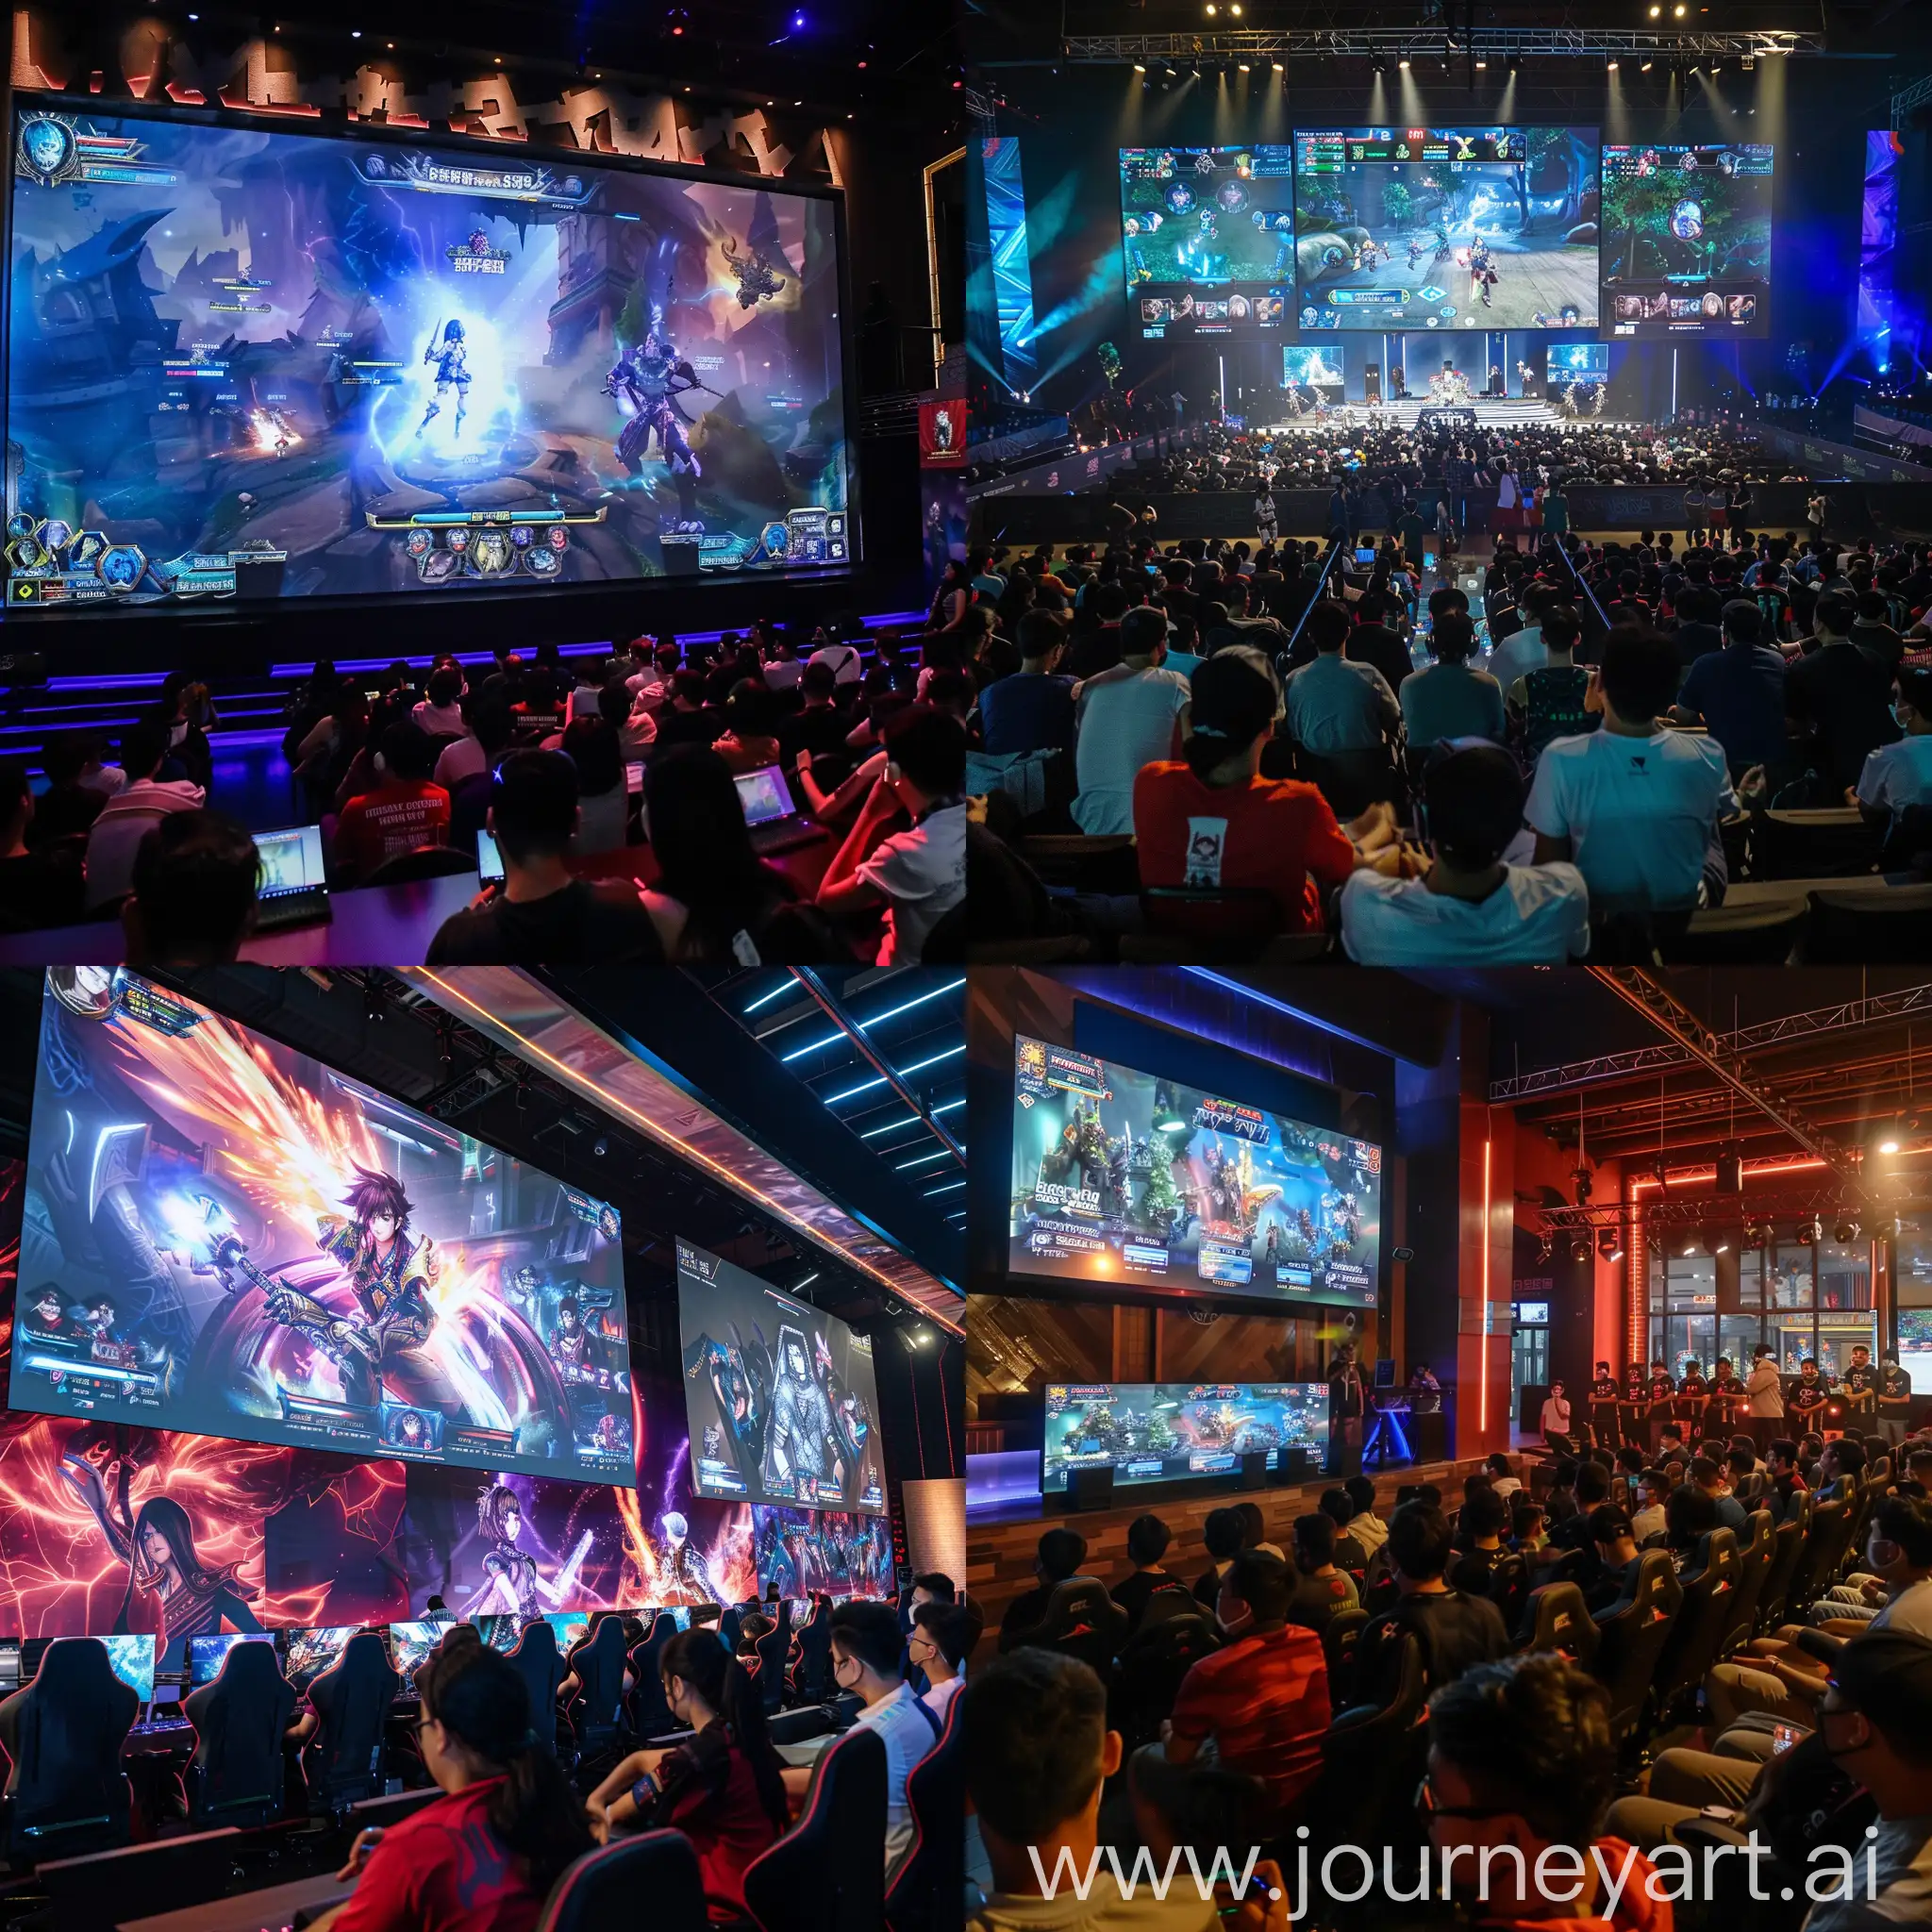 Indonesian-Gamers-Compete-in-Mobile-Legend-Esports-Match